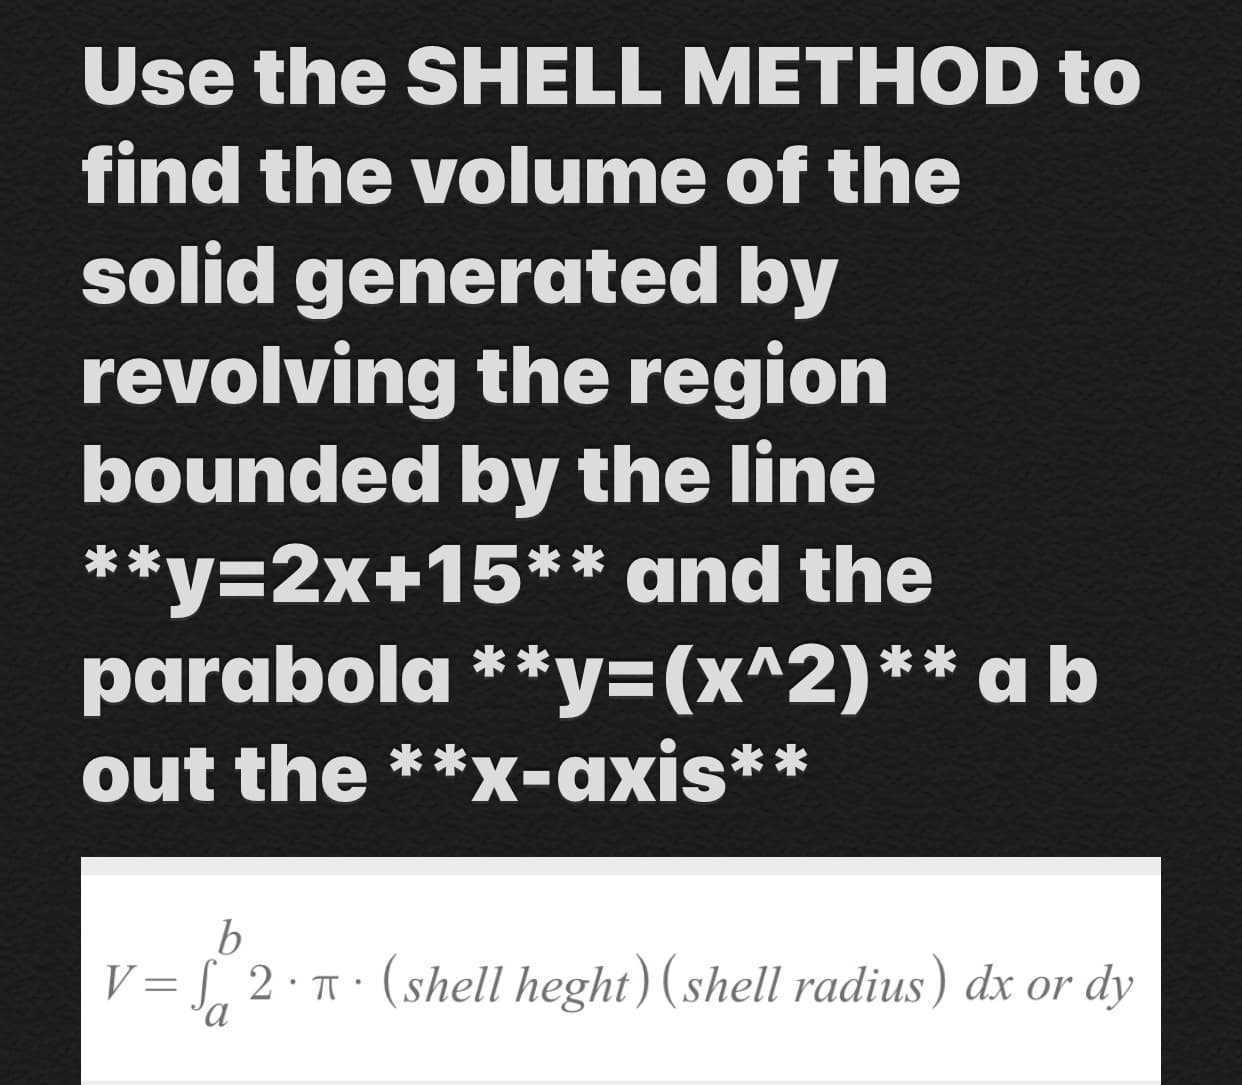 Use the SHELL METHOD to
find the volume of the
solid generated by
revolving the region
bounded by the line
**y=2x+15** and the
parabola **y3(x^2)** a b
out the **x-axis**
V= L, 2 · T · (shell heght) ( shell radius) dx or dy
